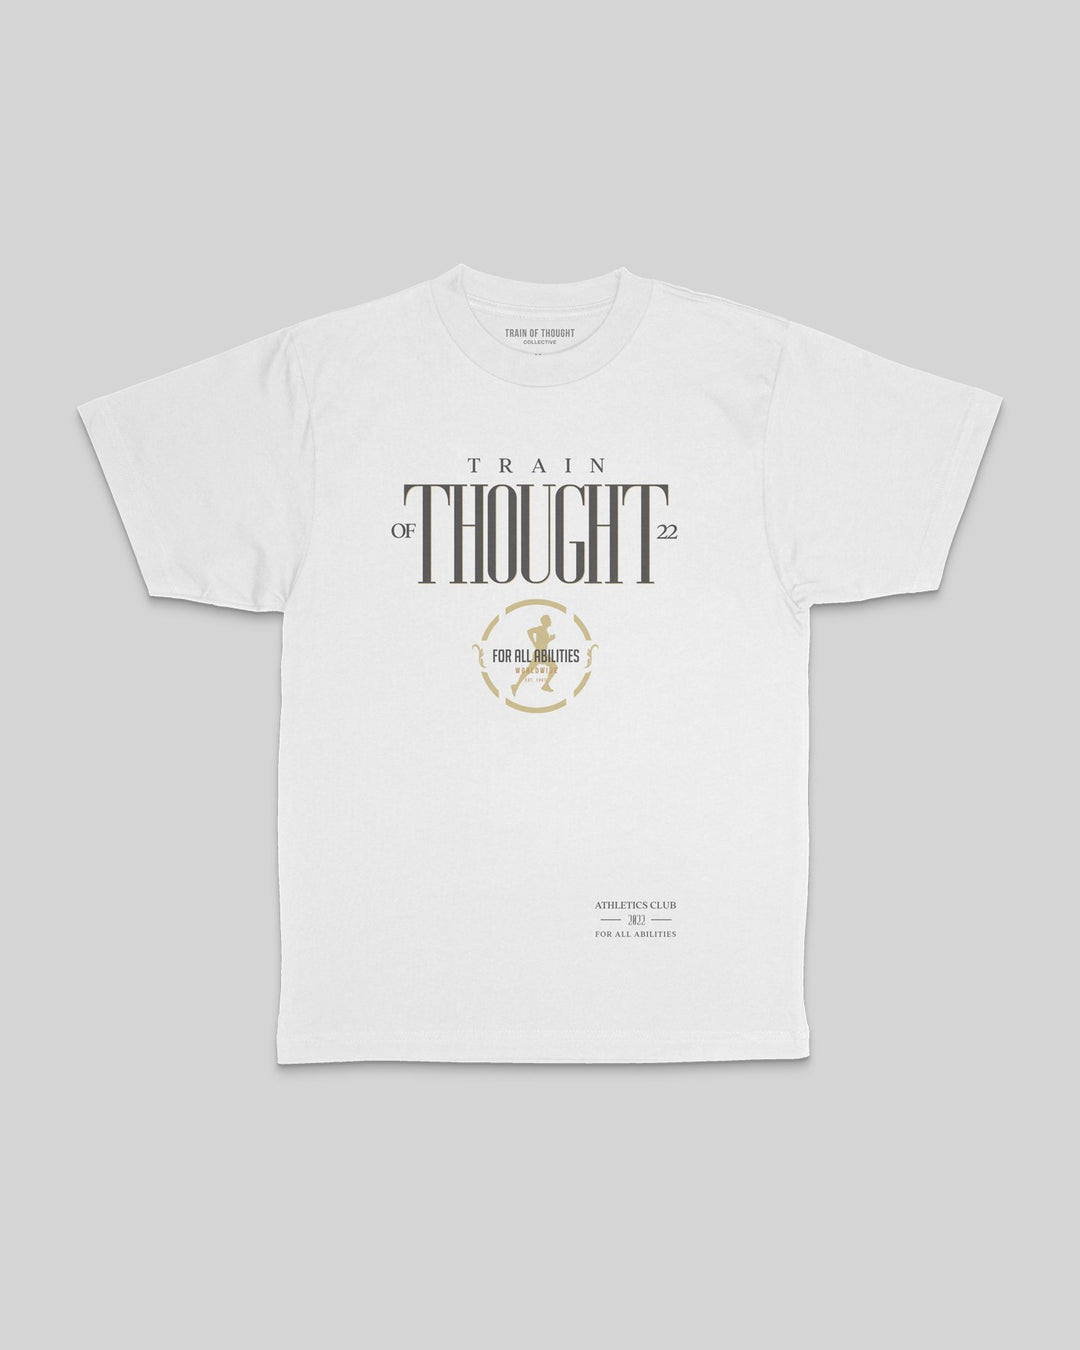 For All Abilities V1 Tee - trainofthoughtcollective